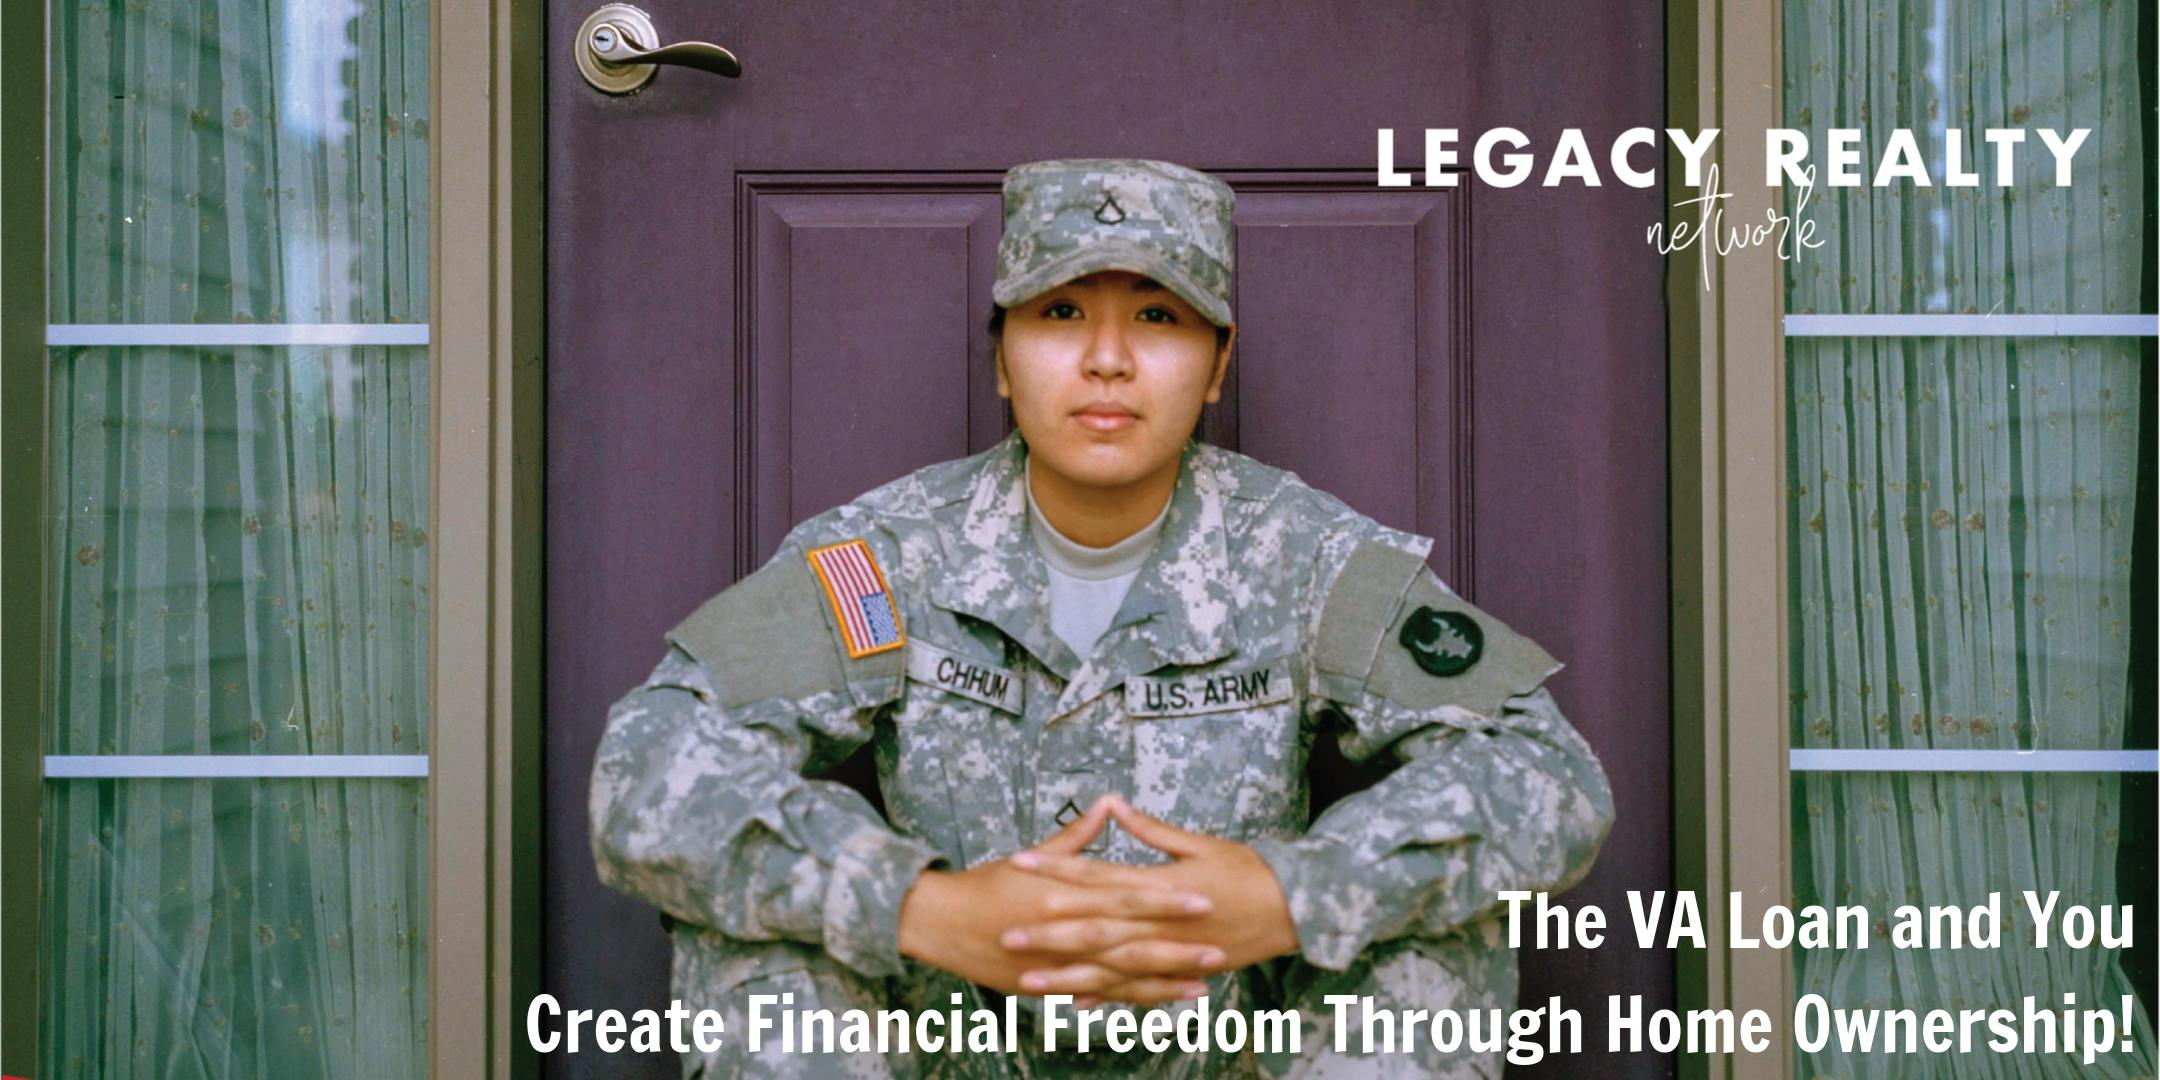 The VA Loan and You - Create Financial Freedom Through Home Ownership!